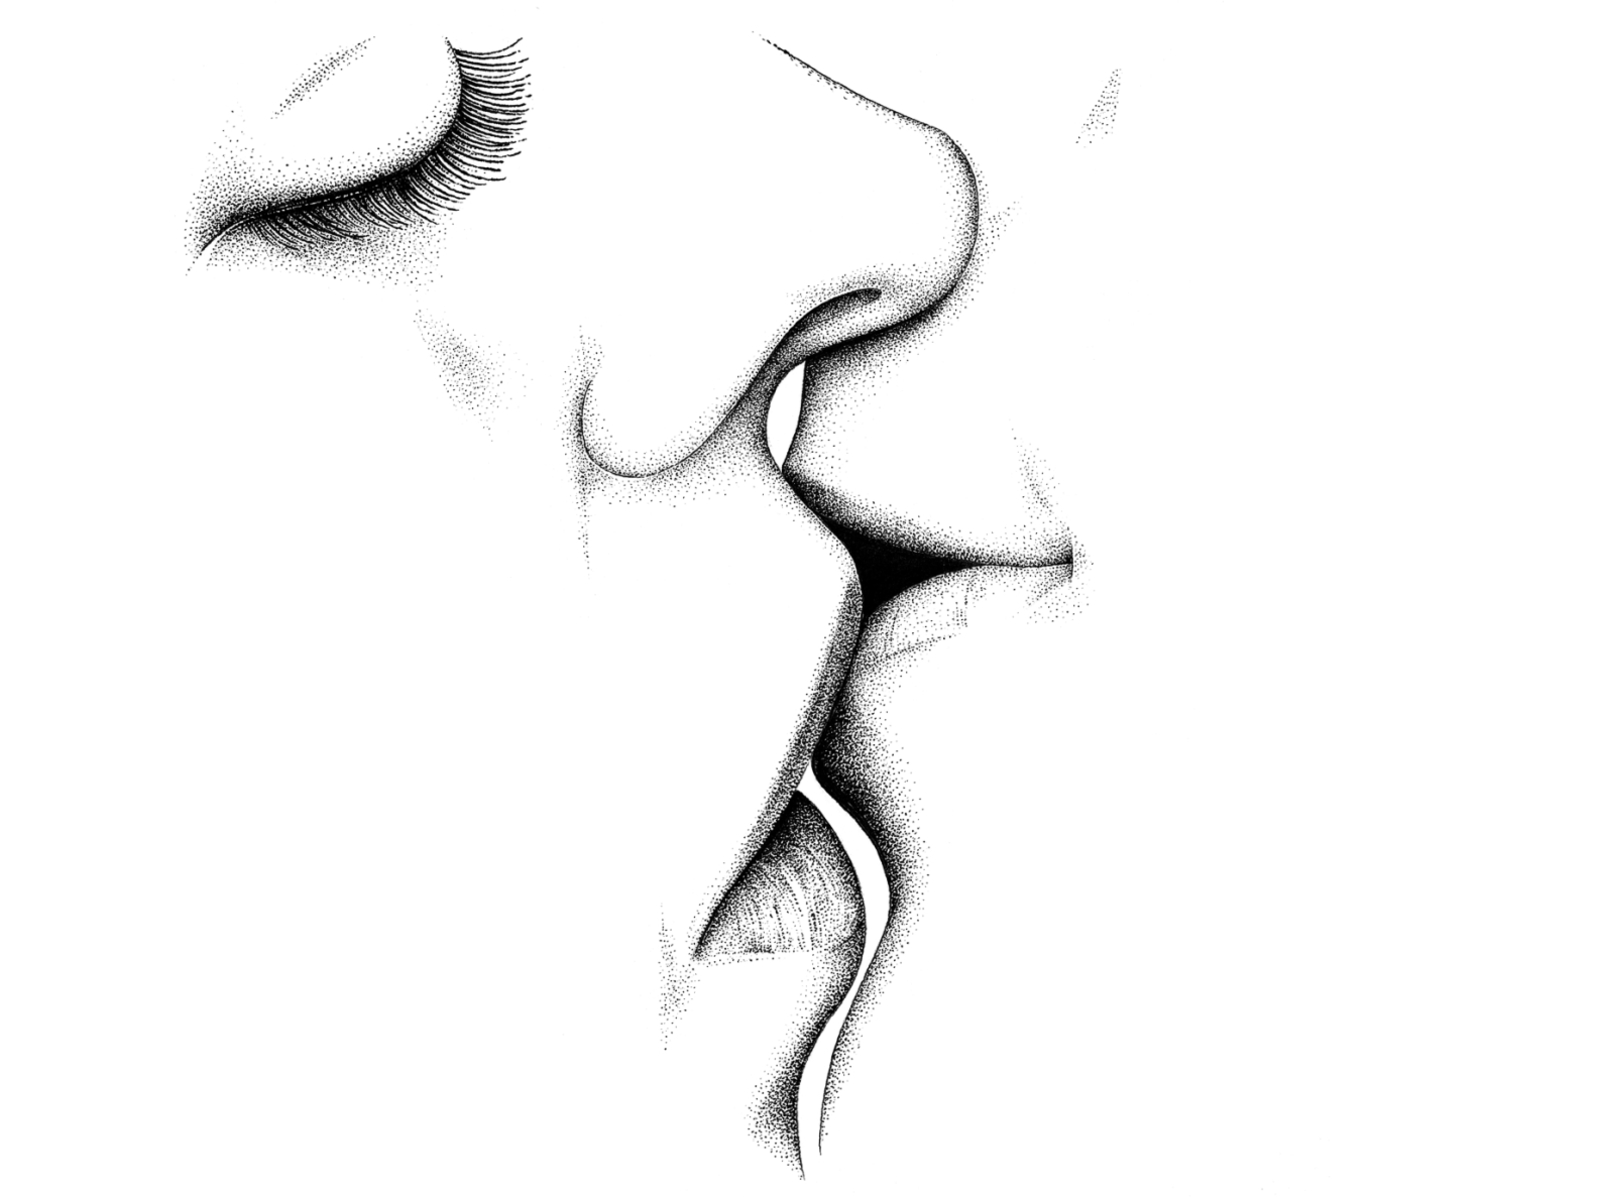 Sketch of a couple kissing by Prodigy5599 on DeviantArt